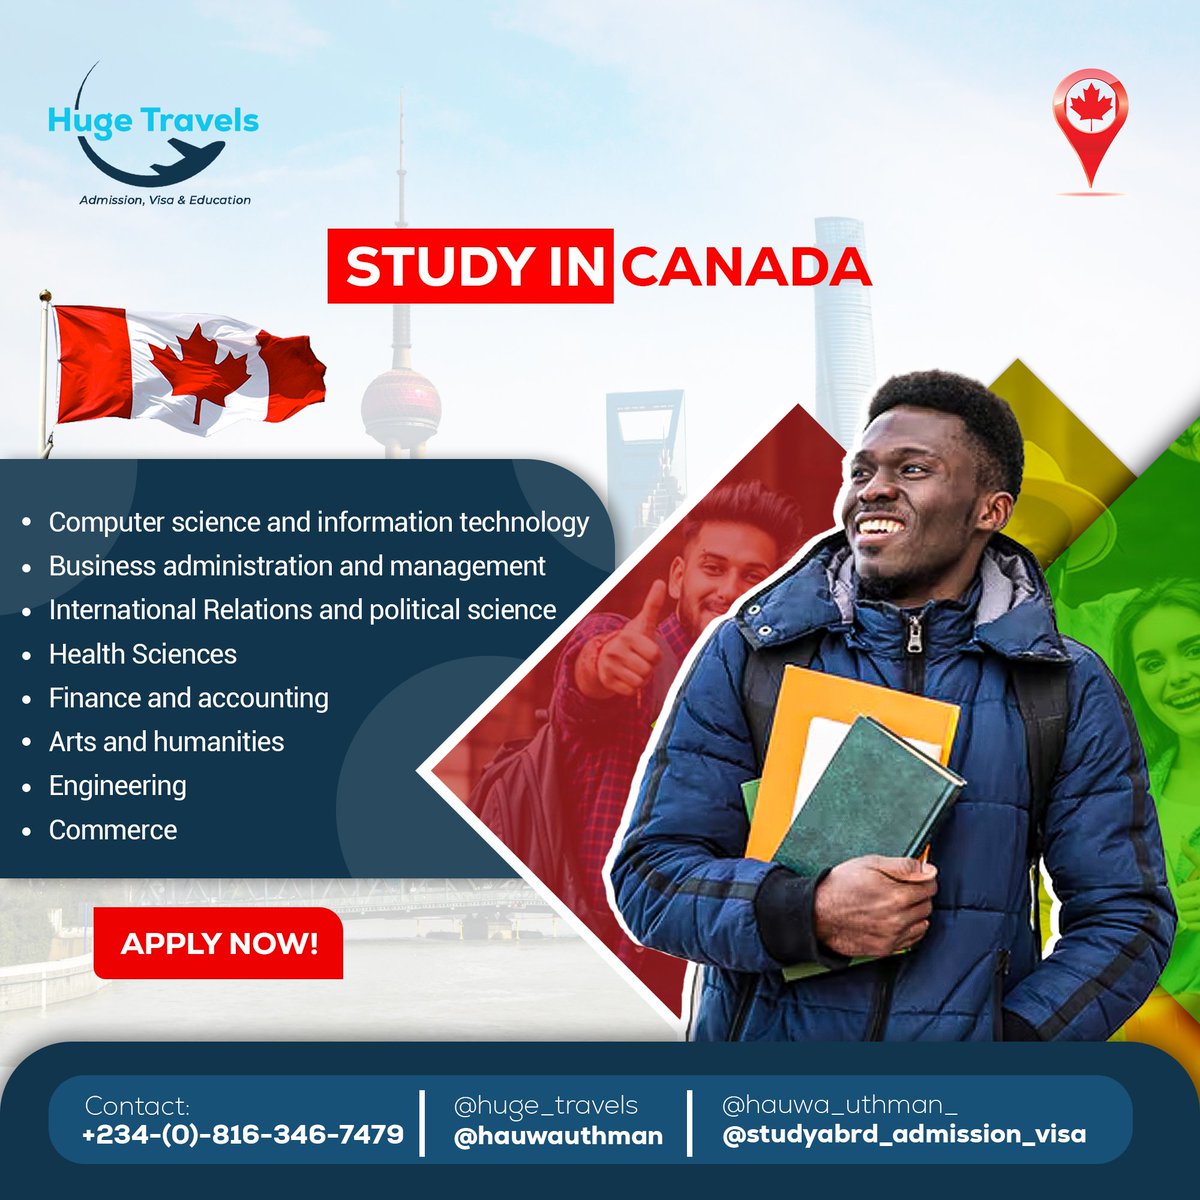 The best time to start is now !!!

Hurry and secure your spot with us and let's make your educational journey one to remember.
#educationInCanada
#studyabroad